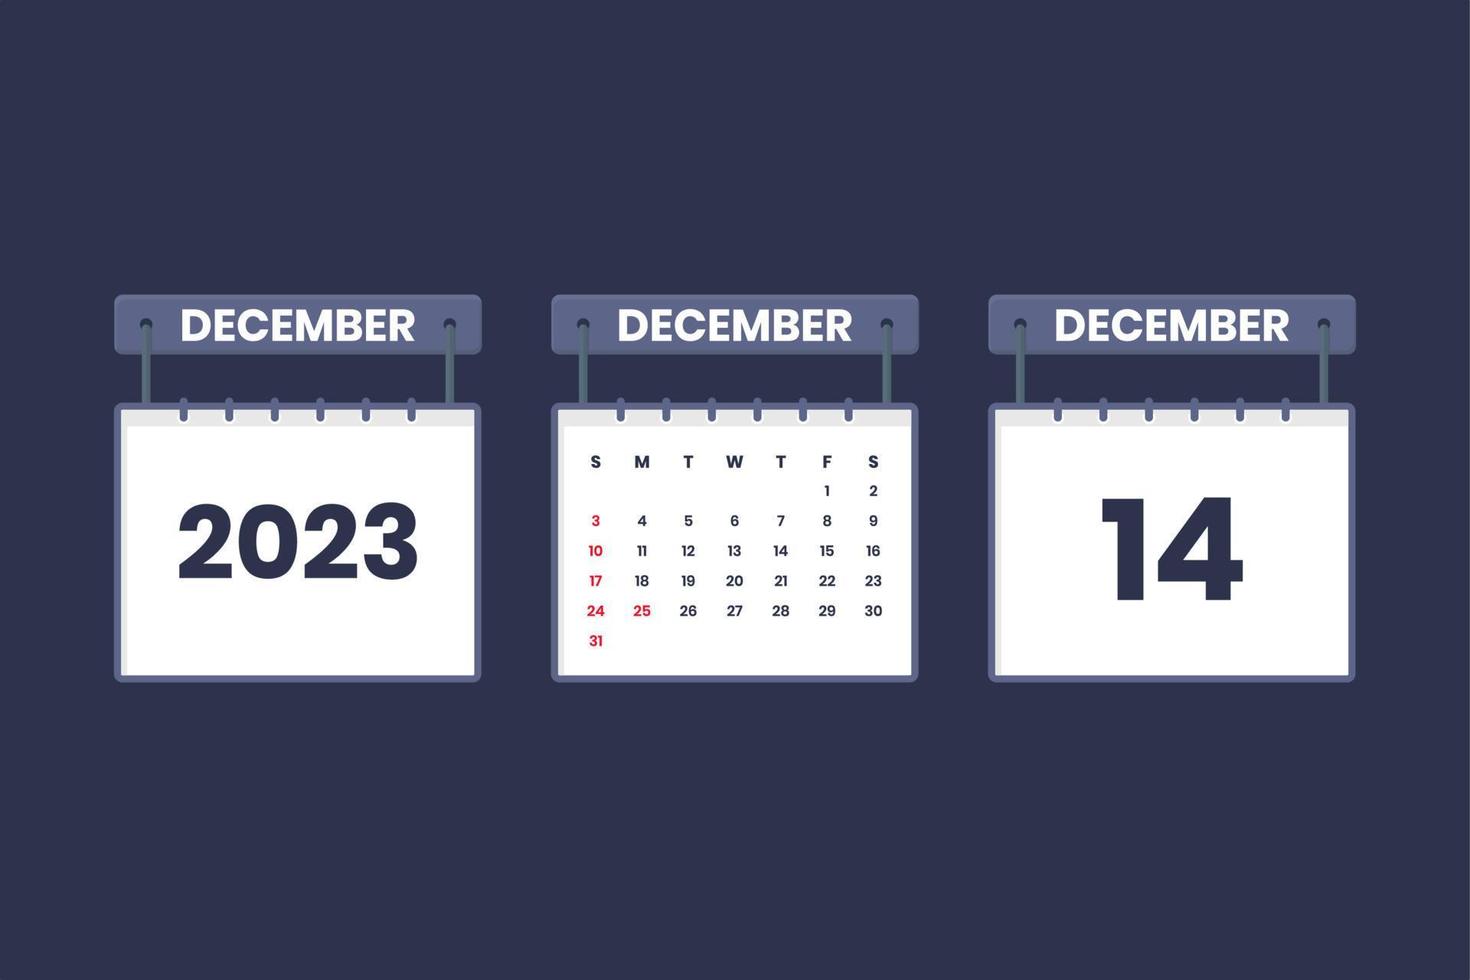 14 December 2023 calendar icon for schedule, appointment, important date concept vector